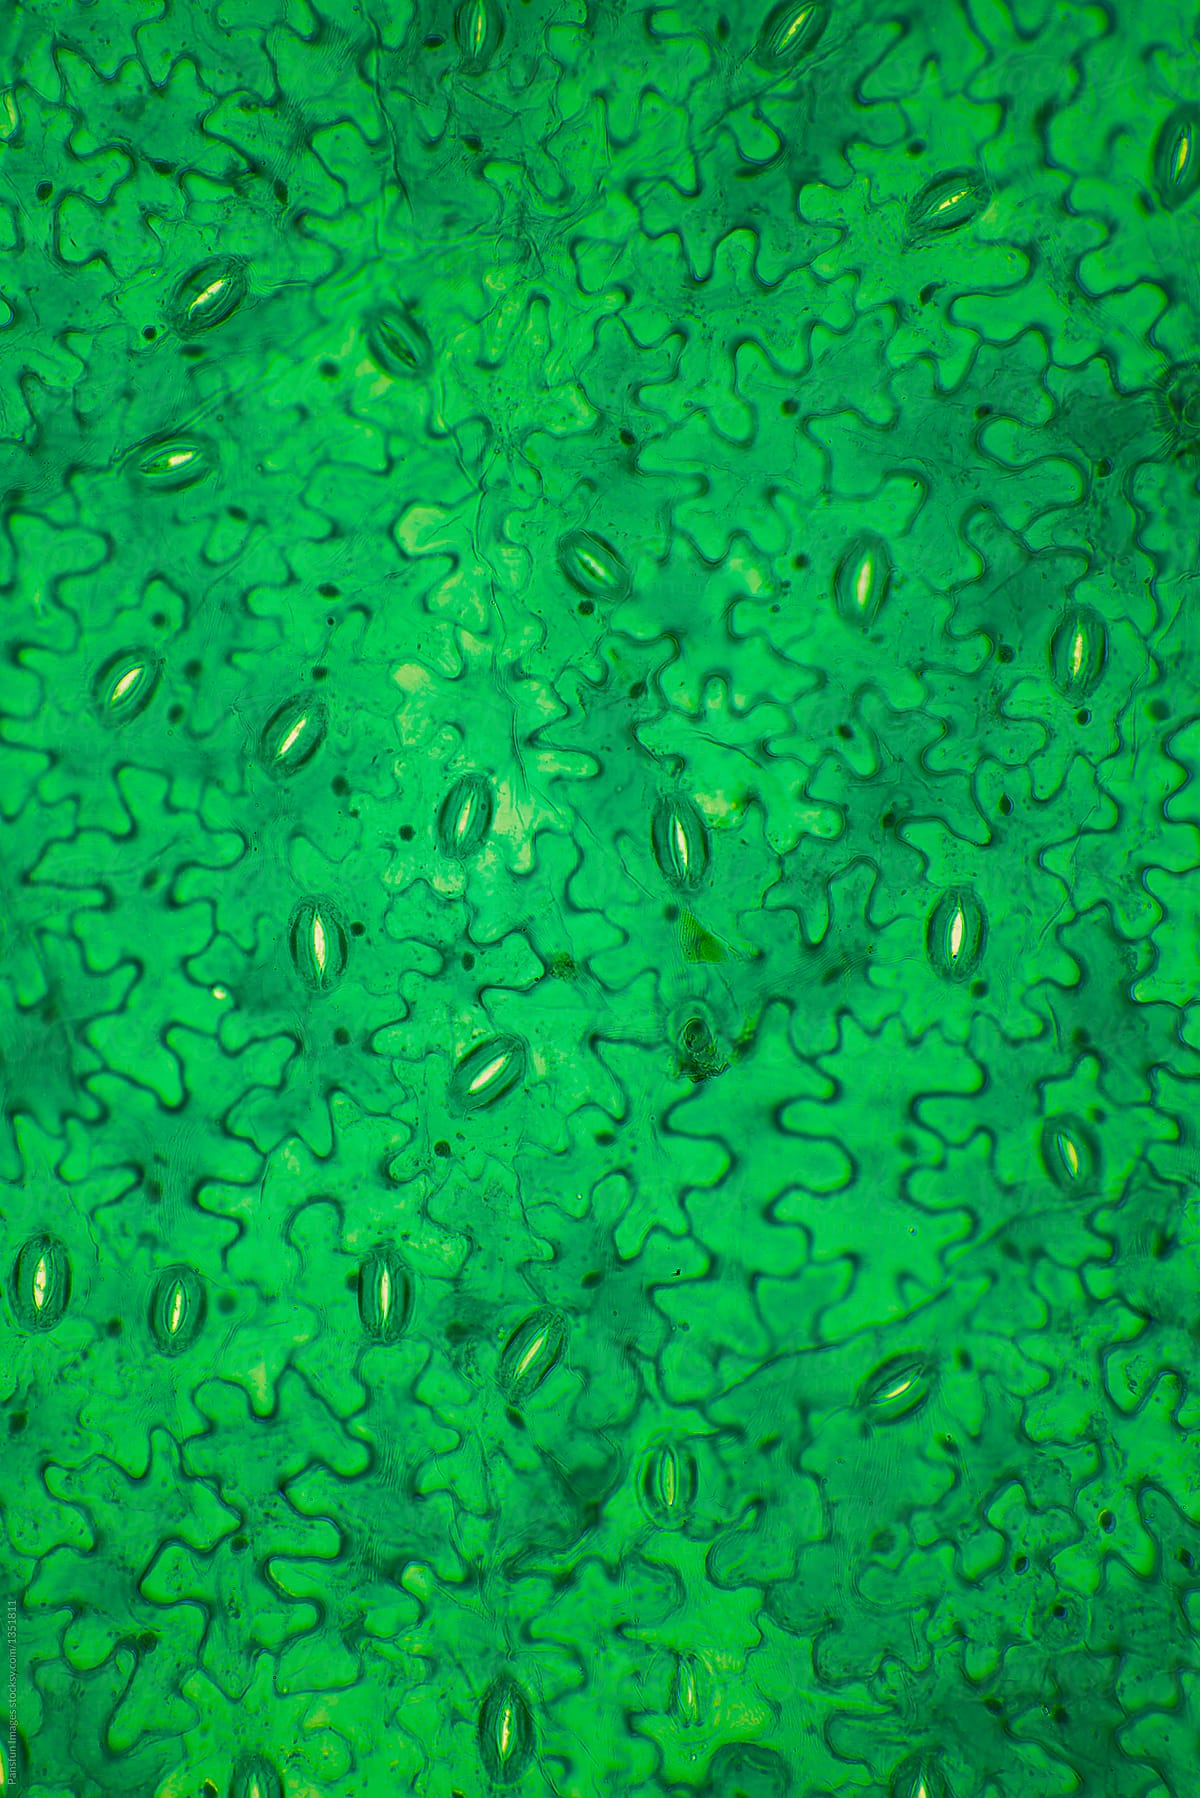 Leaf surface stomata from Rhoeo Disolor plant